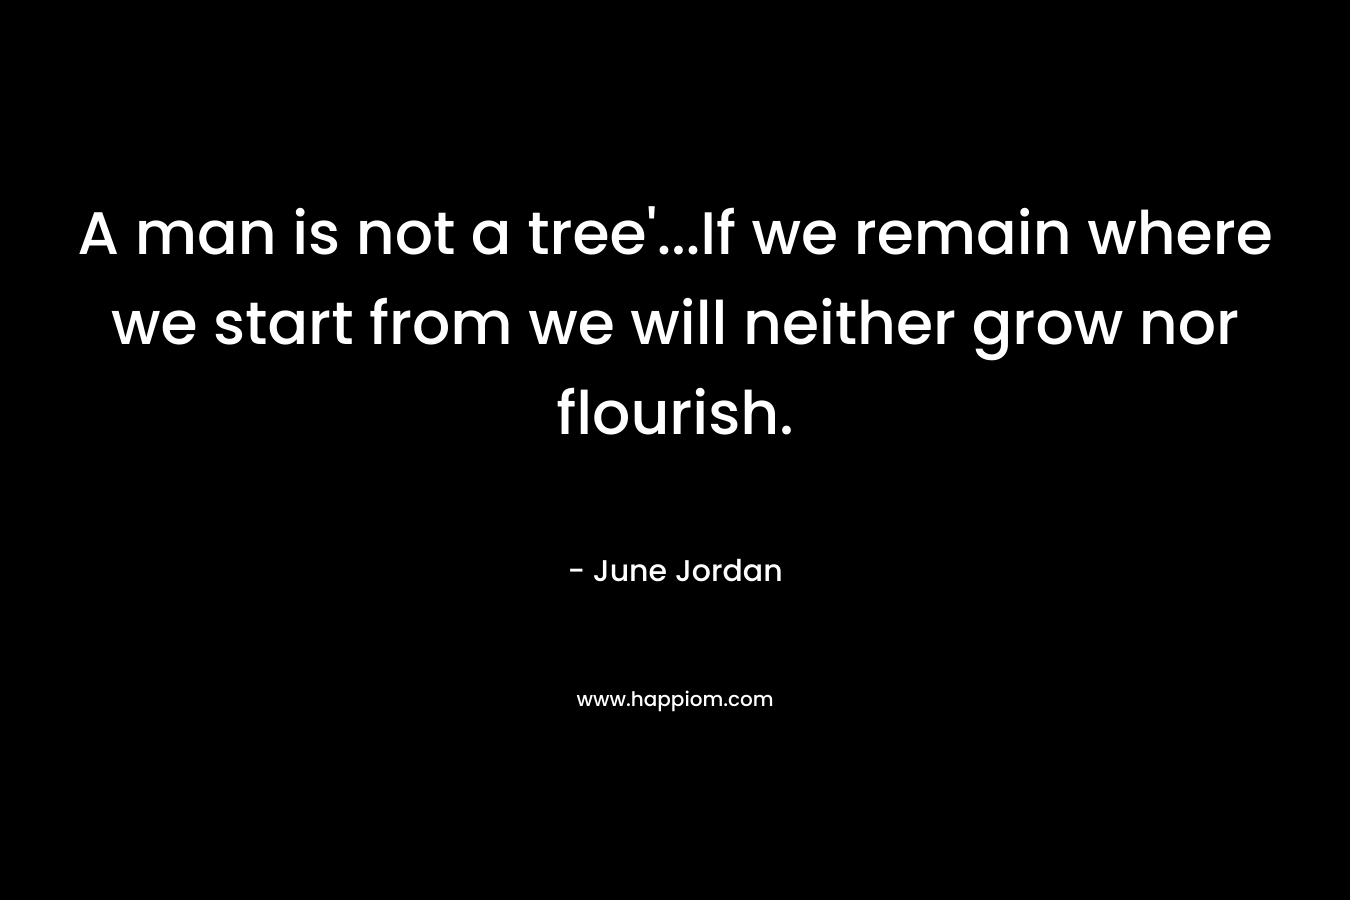 A man is not a tree'...If we remain where we start from we will neither grow nor flourish.